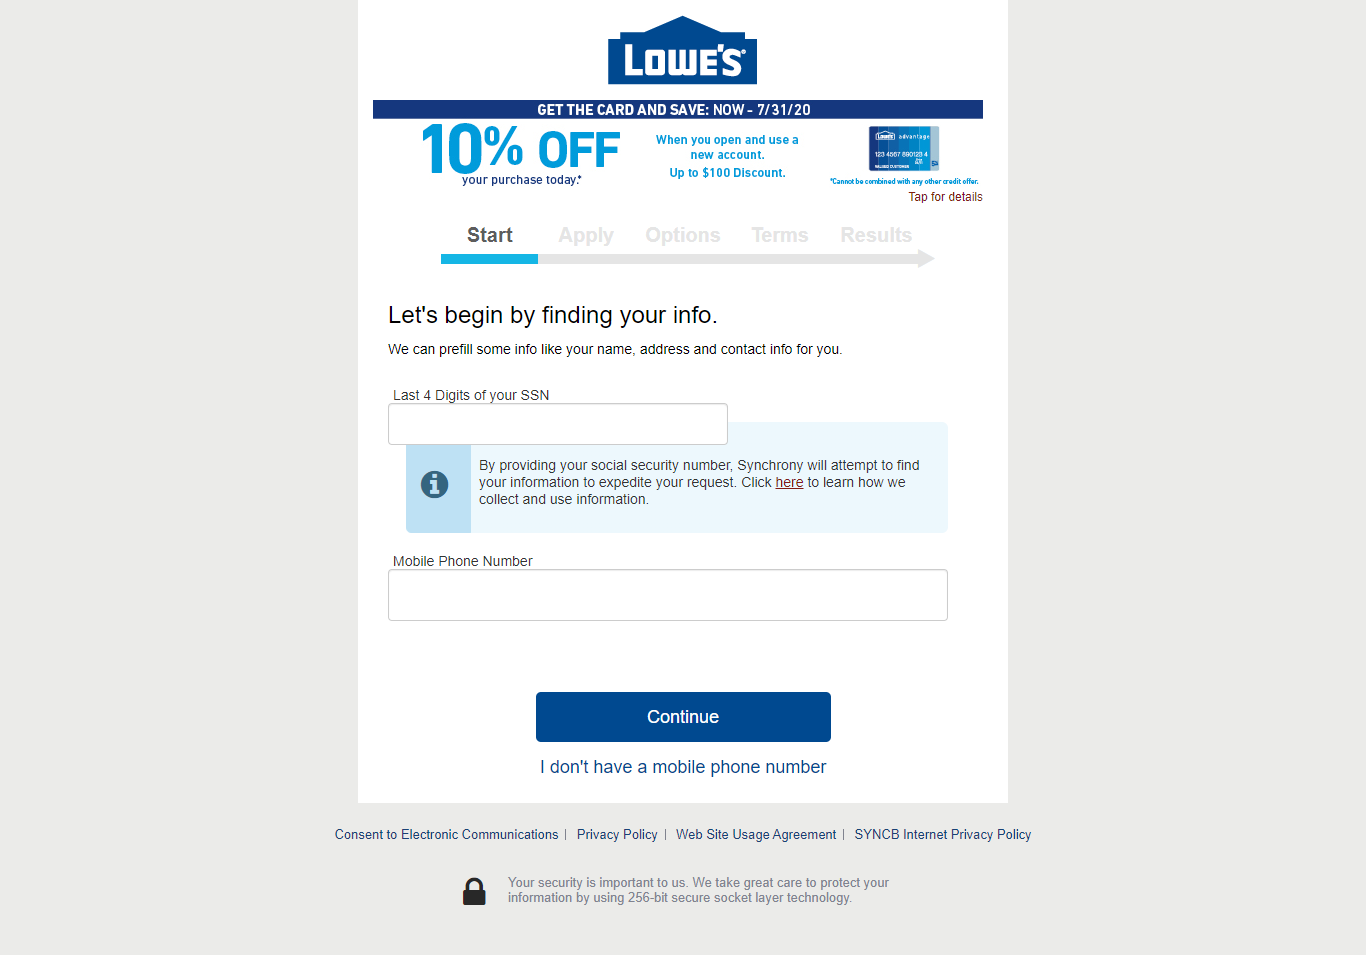 How to Activate Lowe’s Credit Card